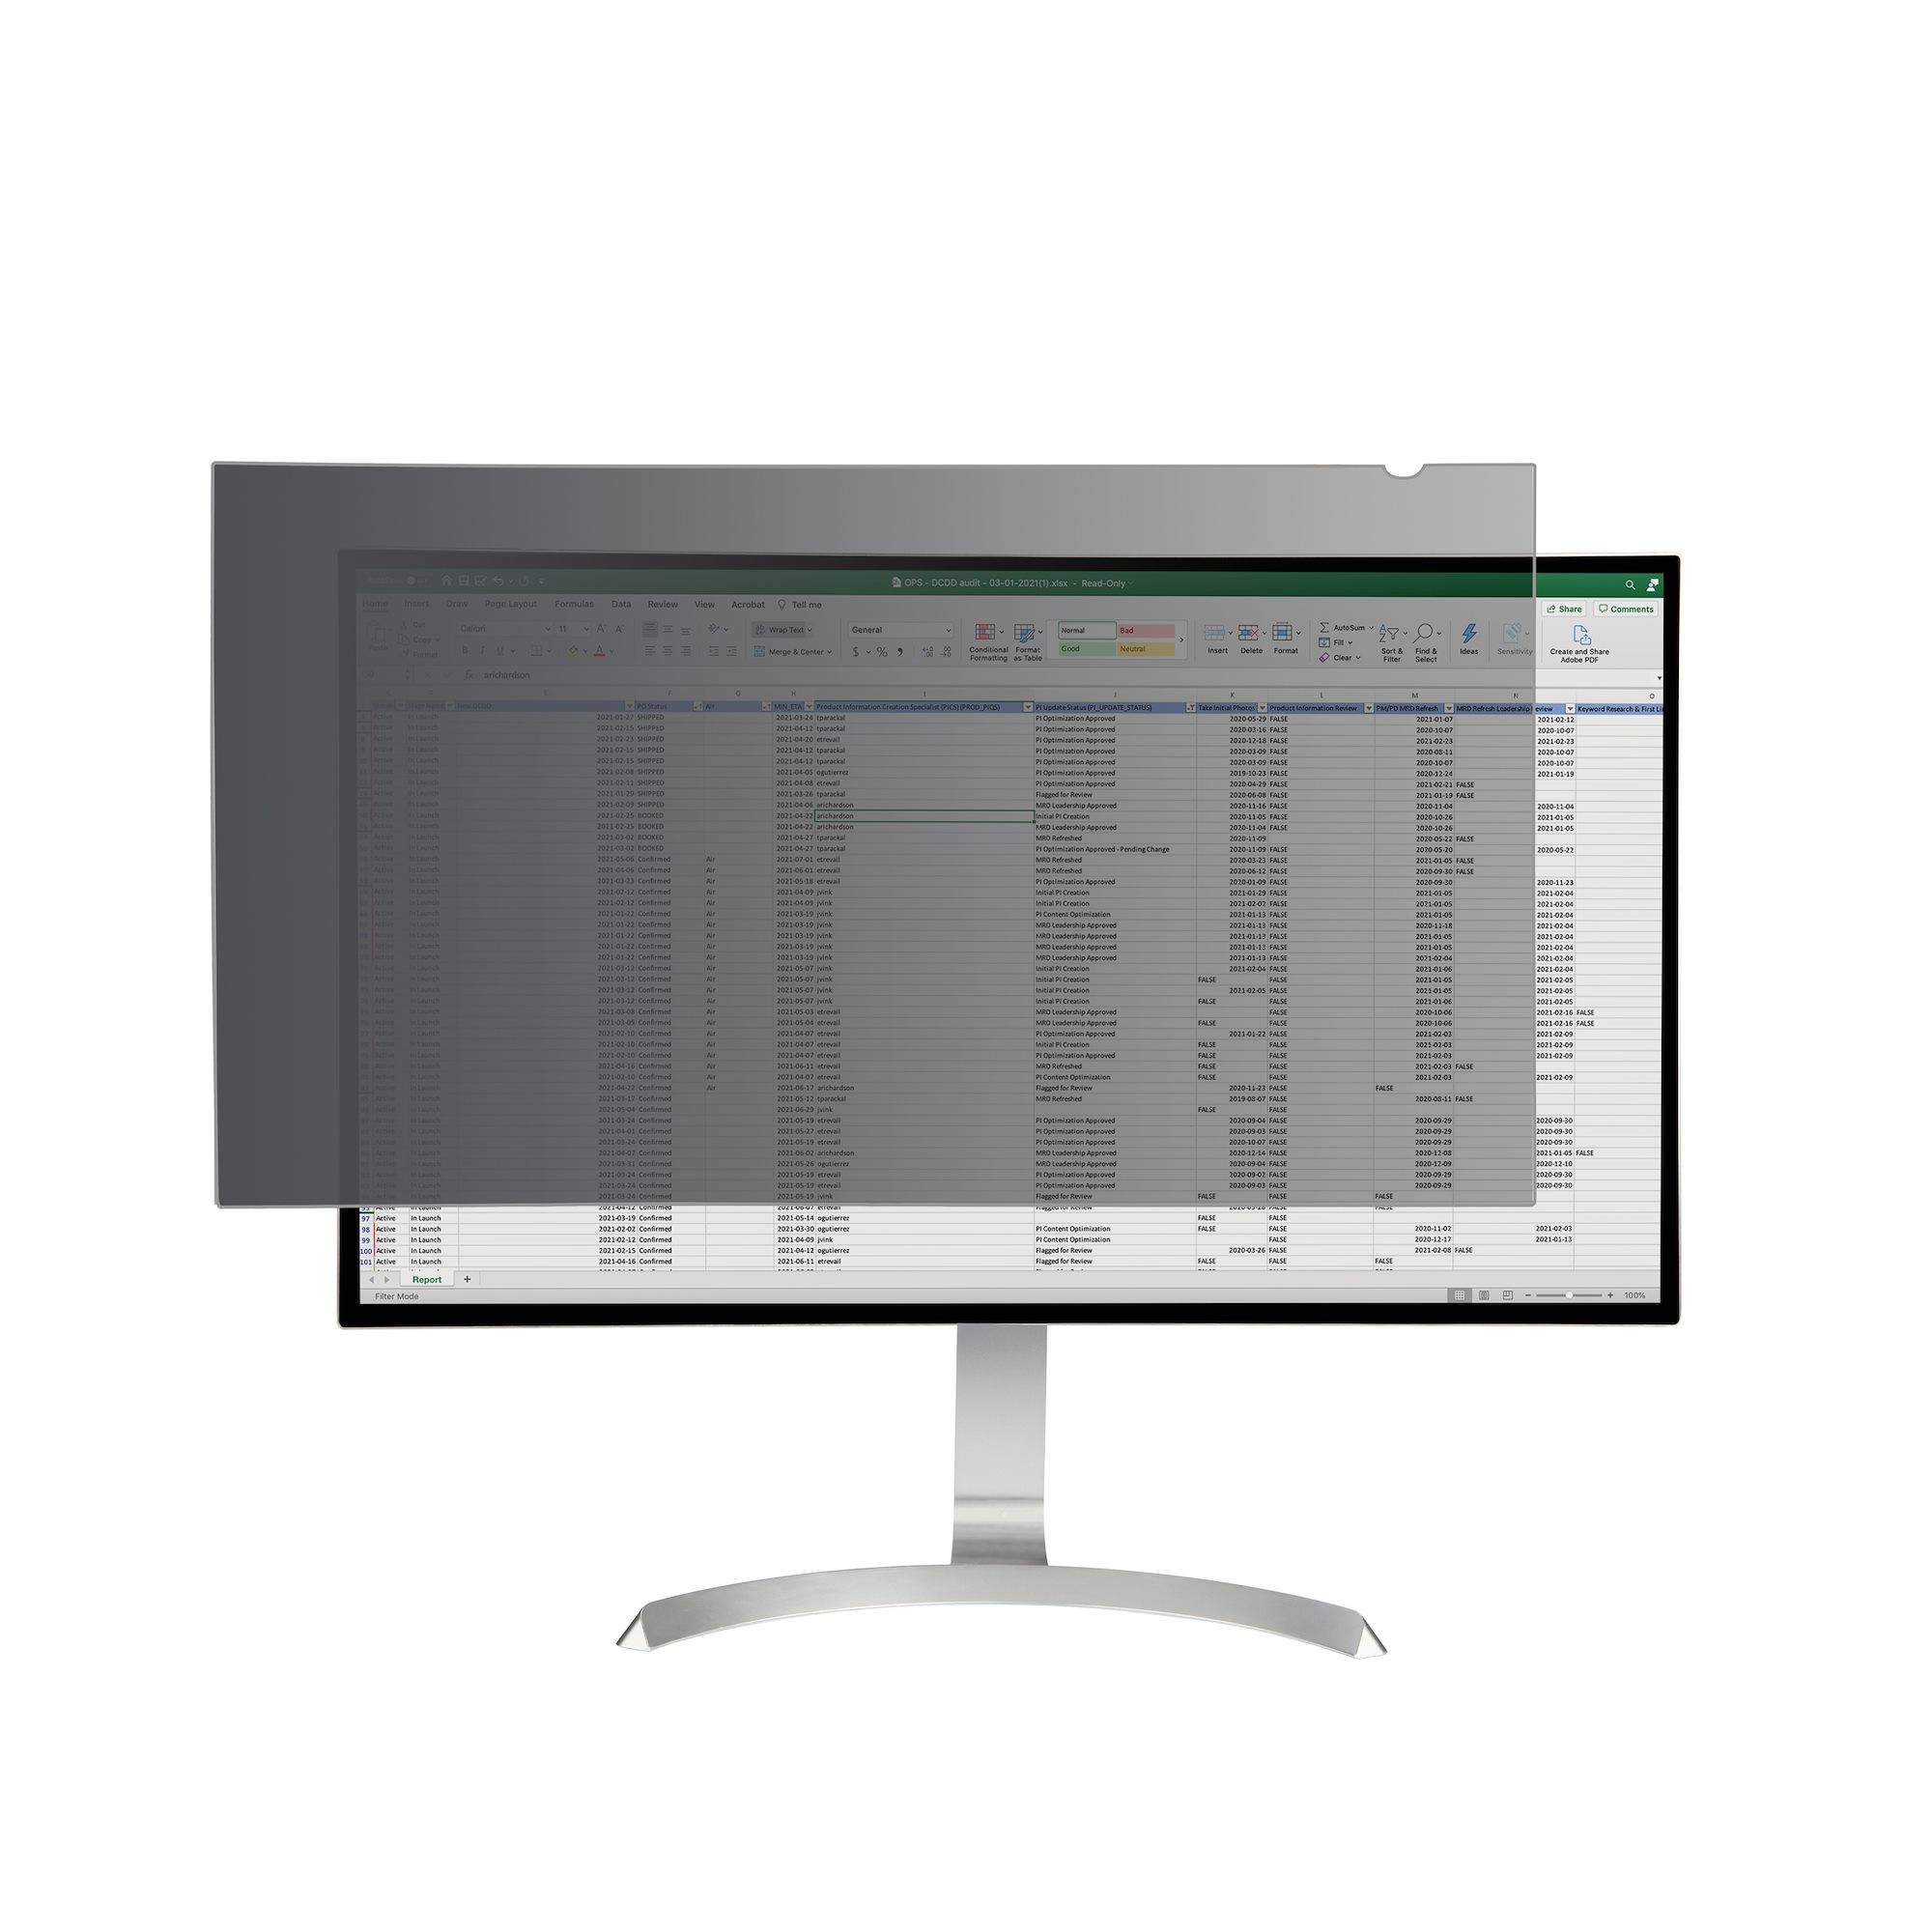 Rca Informatique - Image du produit : 27IN MONITOR PRIVACY SCREEN - UNIVERSAL - MATTE OR GLOSSY